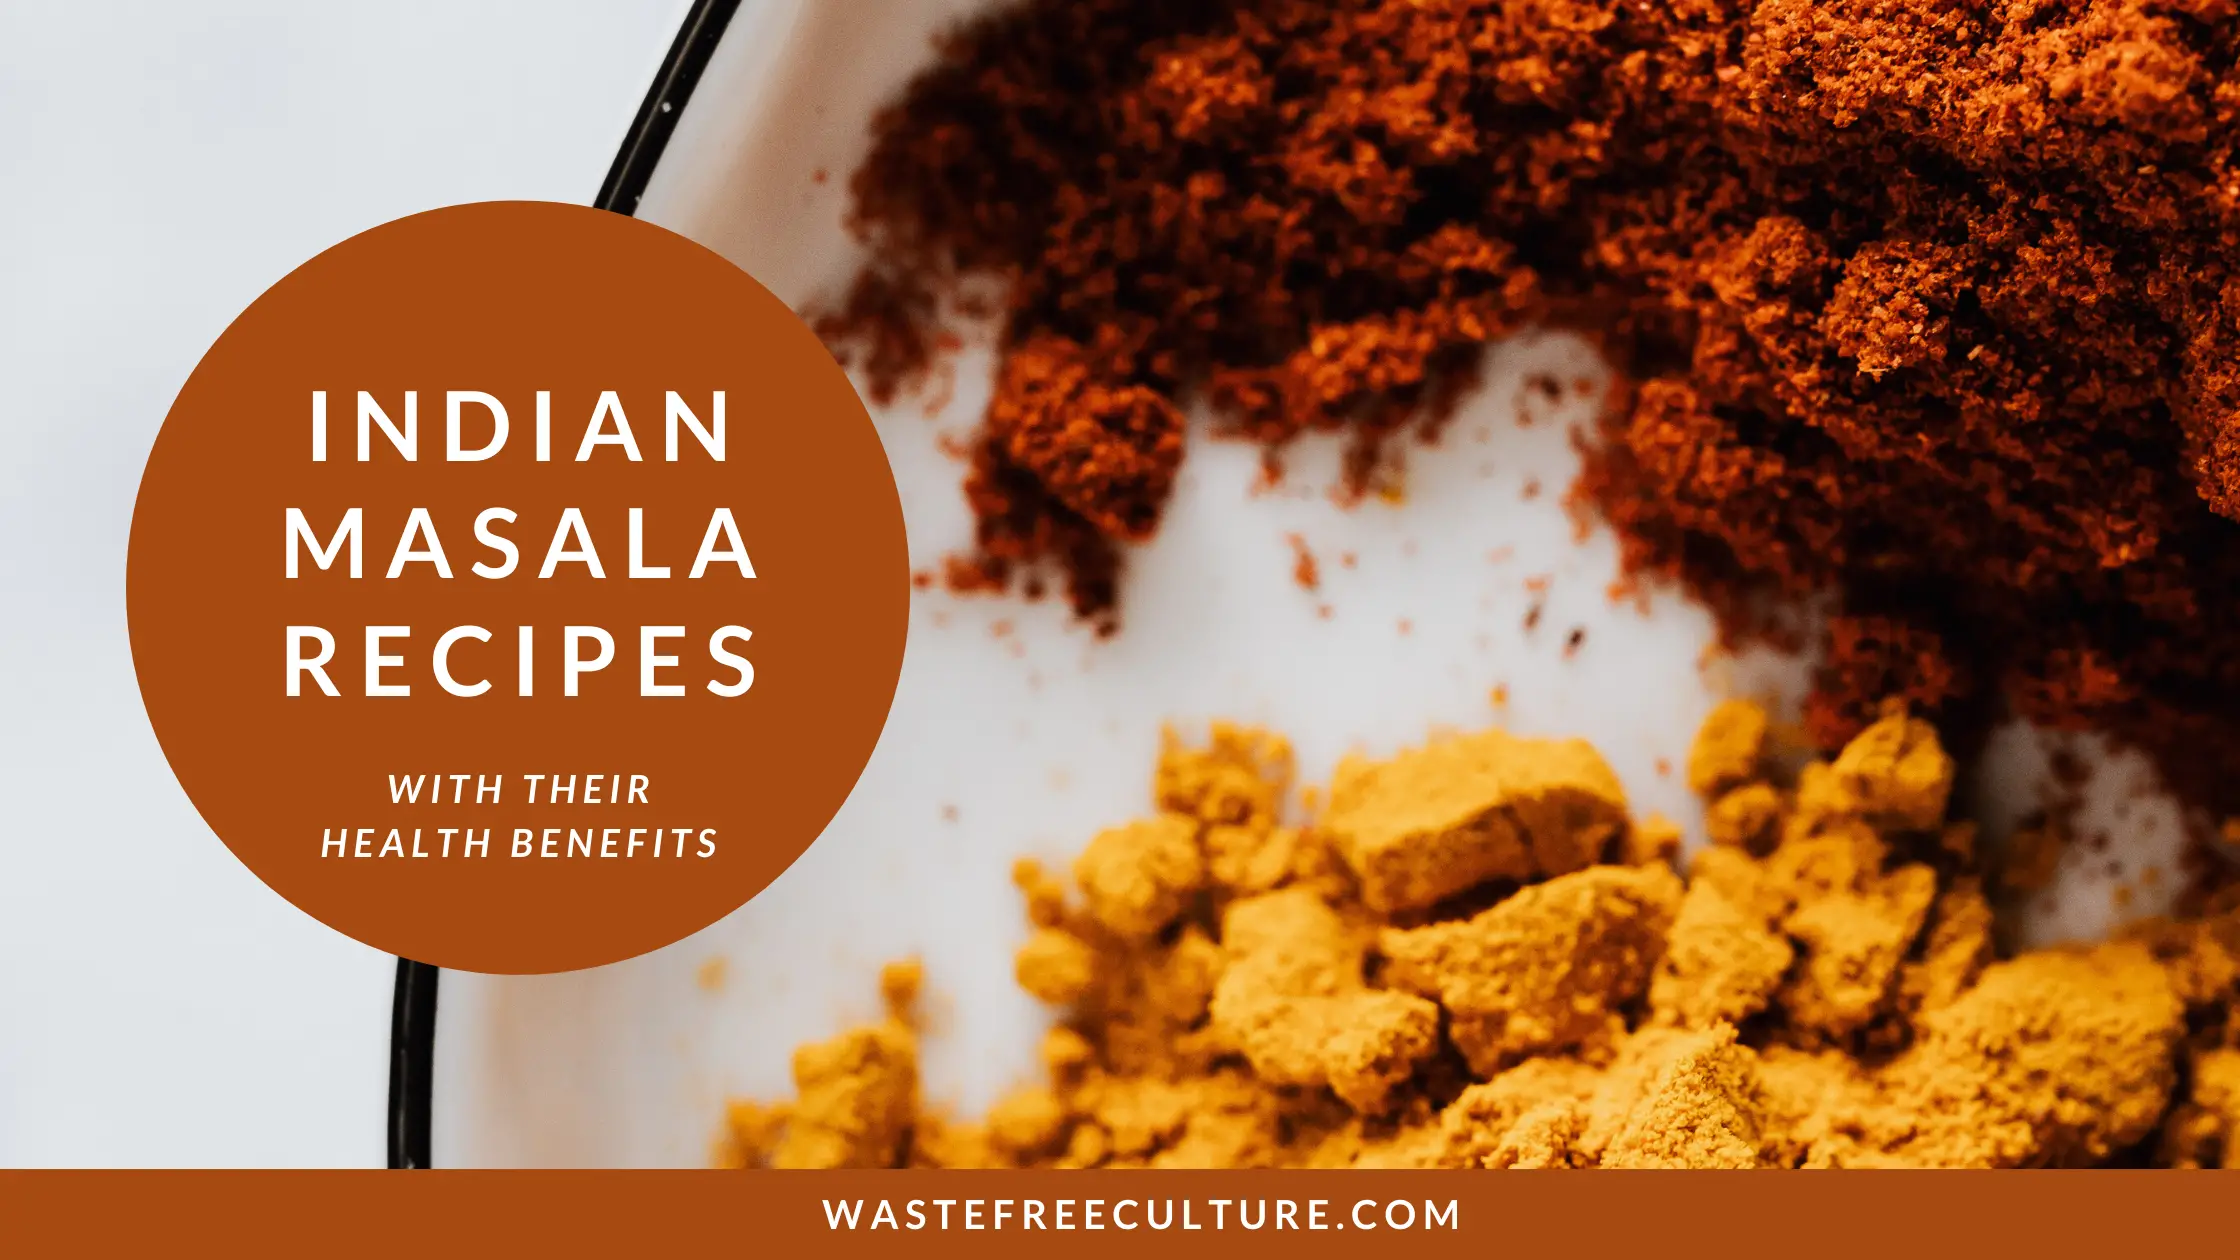 Indian masala recipes with their health benefits